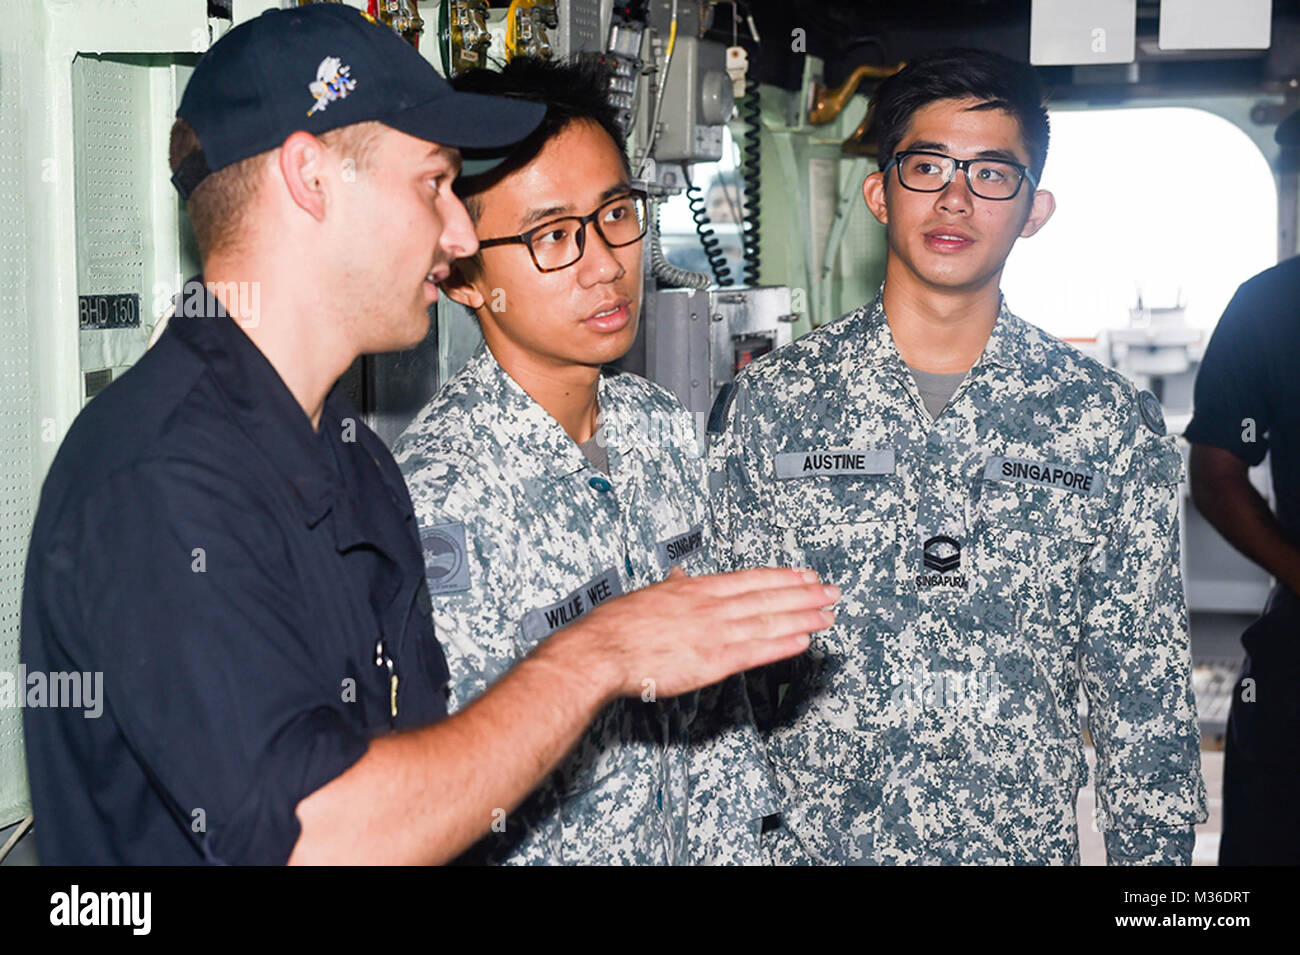 160726-N-YS140-048 SOUTH CHINA SEA (July 26, 2016) Republic of Singapore (RSN) sailors Lt. Willie Wee and Cpl. Austine Yapp are briefed by Ens. Drew Boyer aboard the Arleigh Burke-class guided missile-destroyer USS Stethem (DDG 63) as part of a sailor exchange during Cooperation Afloat Readiness and Training (CARAT) Singapore 2016, July 26. CARAT is a series of annual maritime exercises between the U.S. Navy, U.S. Marine Corps and the armed forces of nine partner nations to include Bangladesh, Brunei, Cambodia, Indonesia, Malaysia, the Philippines, Singapore, Thailand, and Timor-Leste. (U.S. N Stock Photo